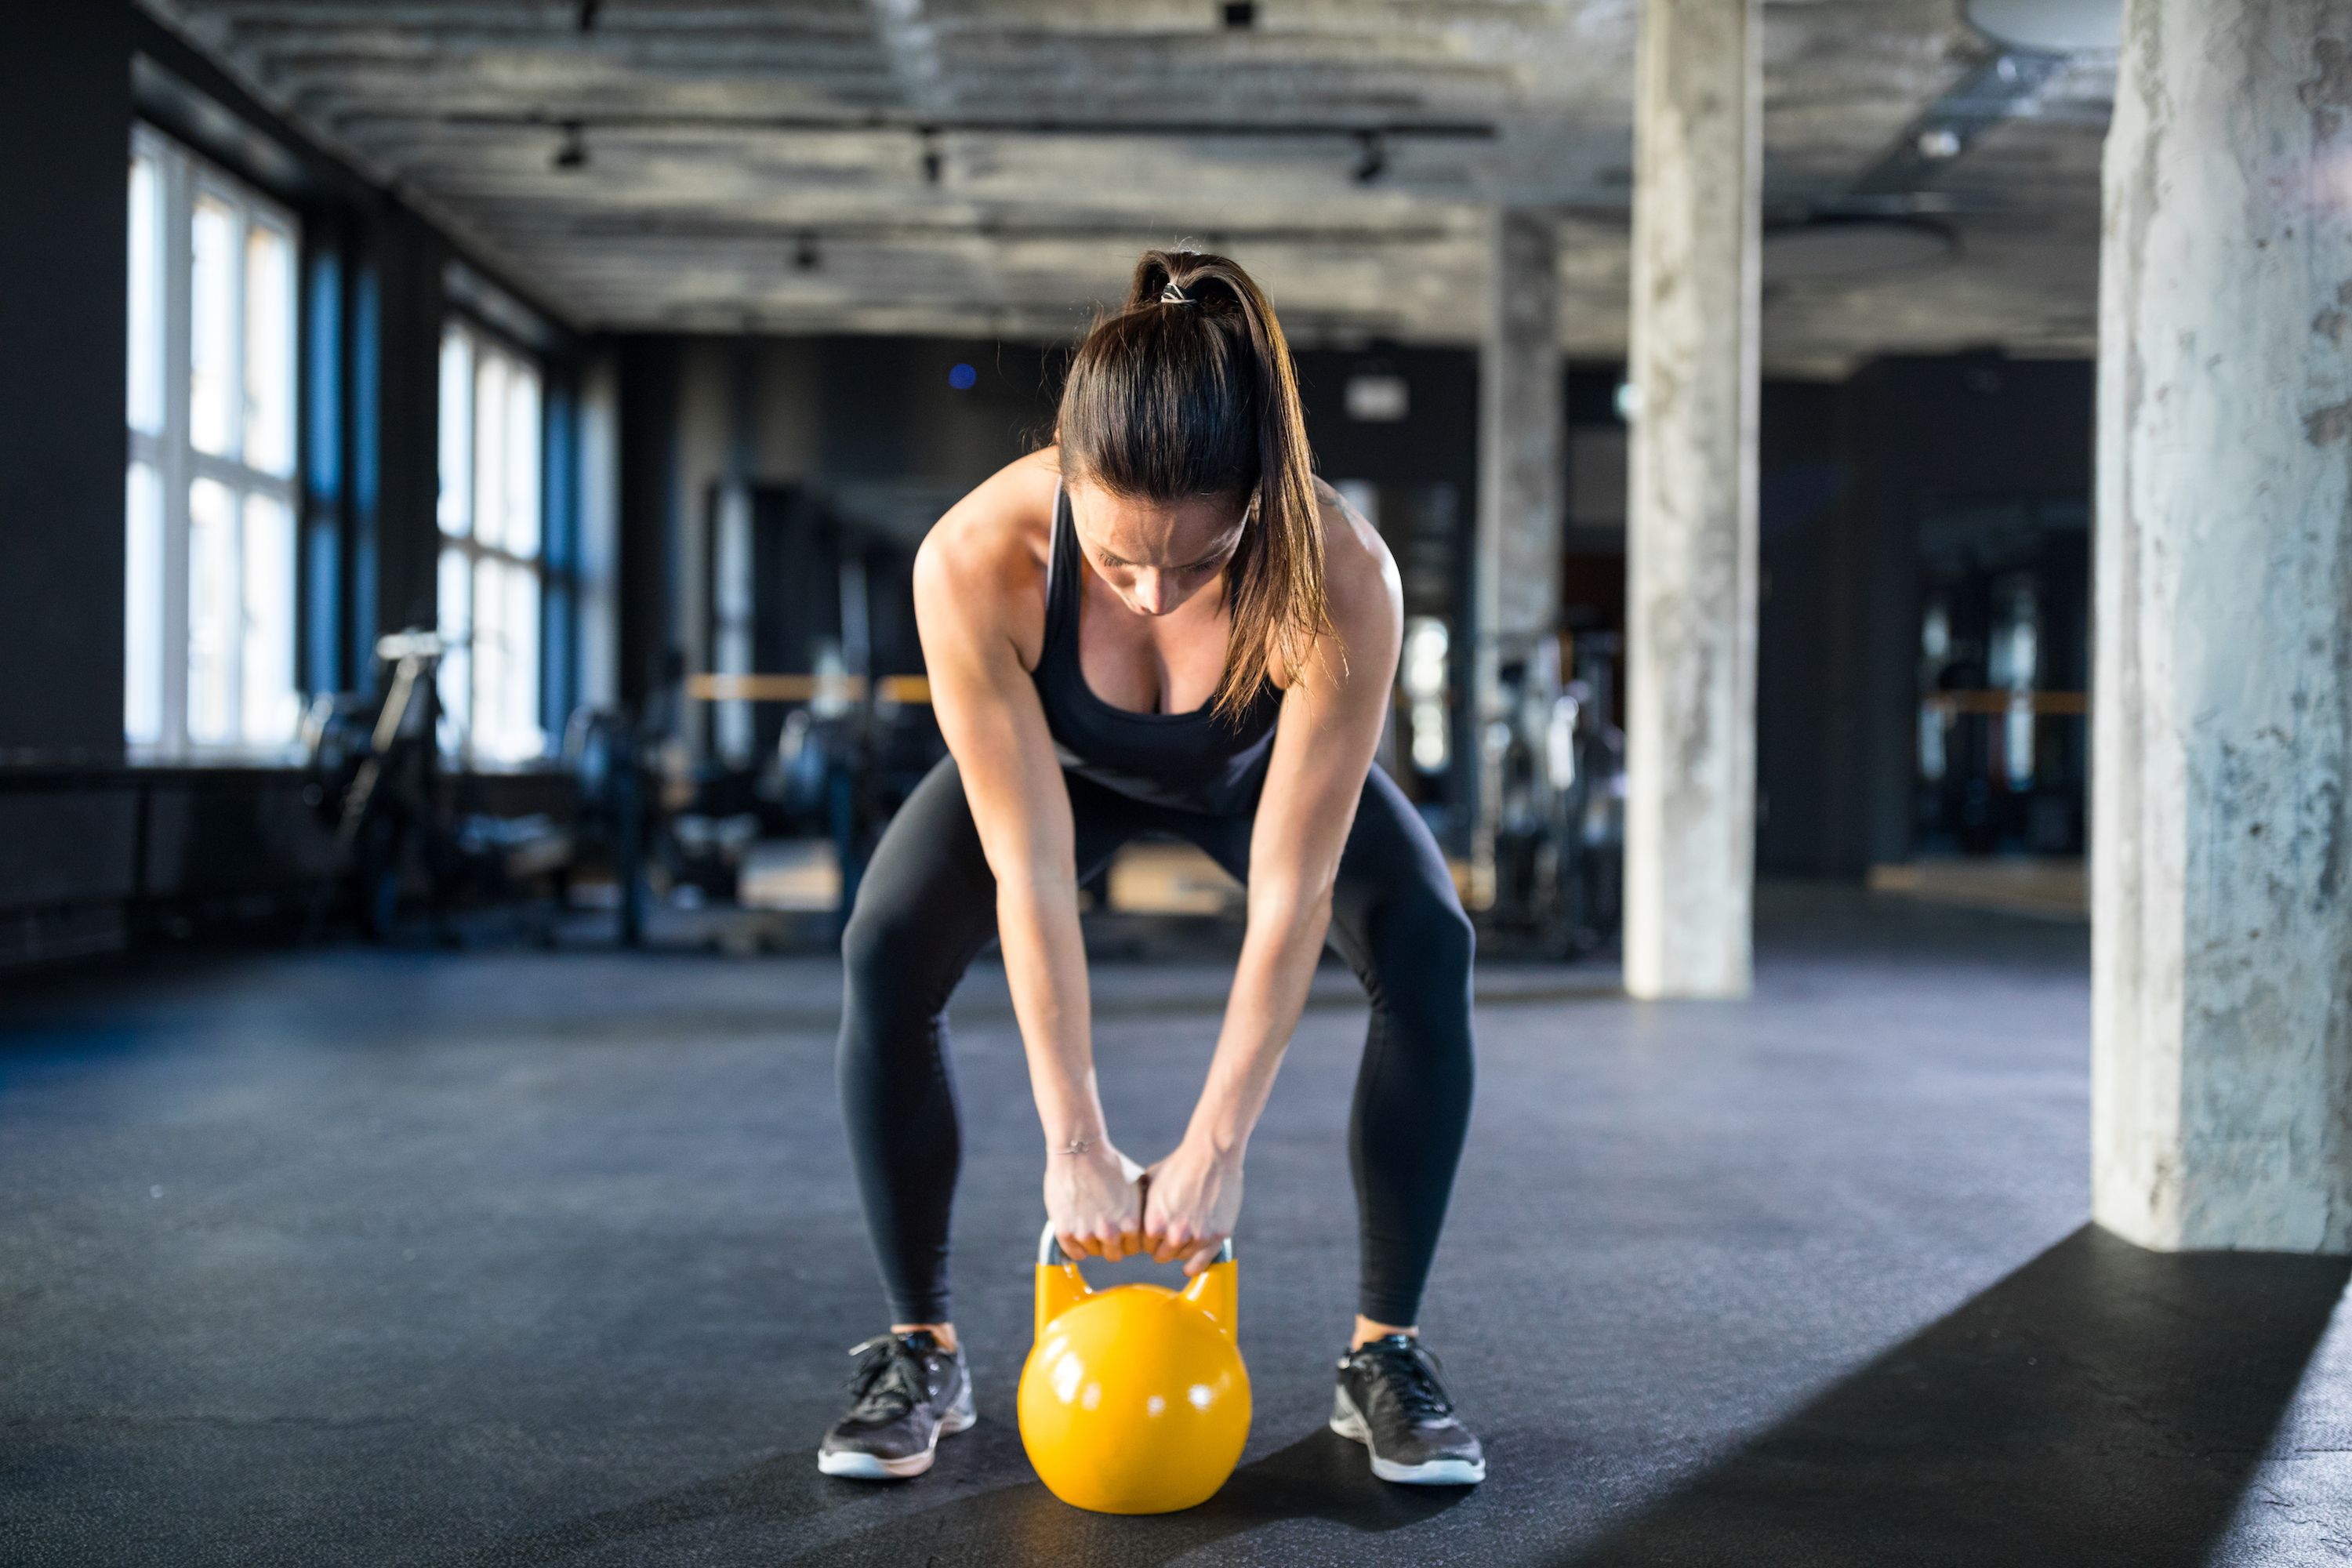 How to Build a Kettlebell Workout for Beginners